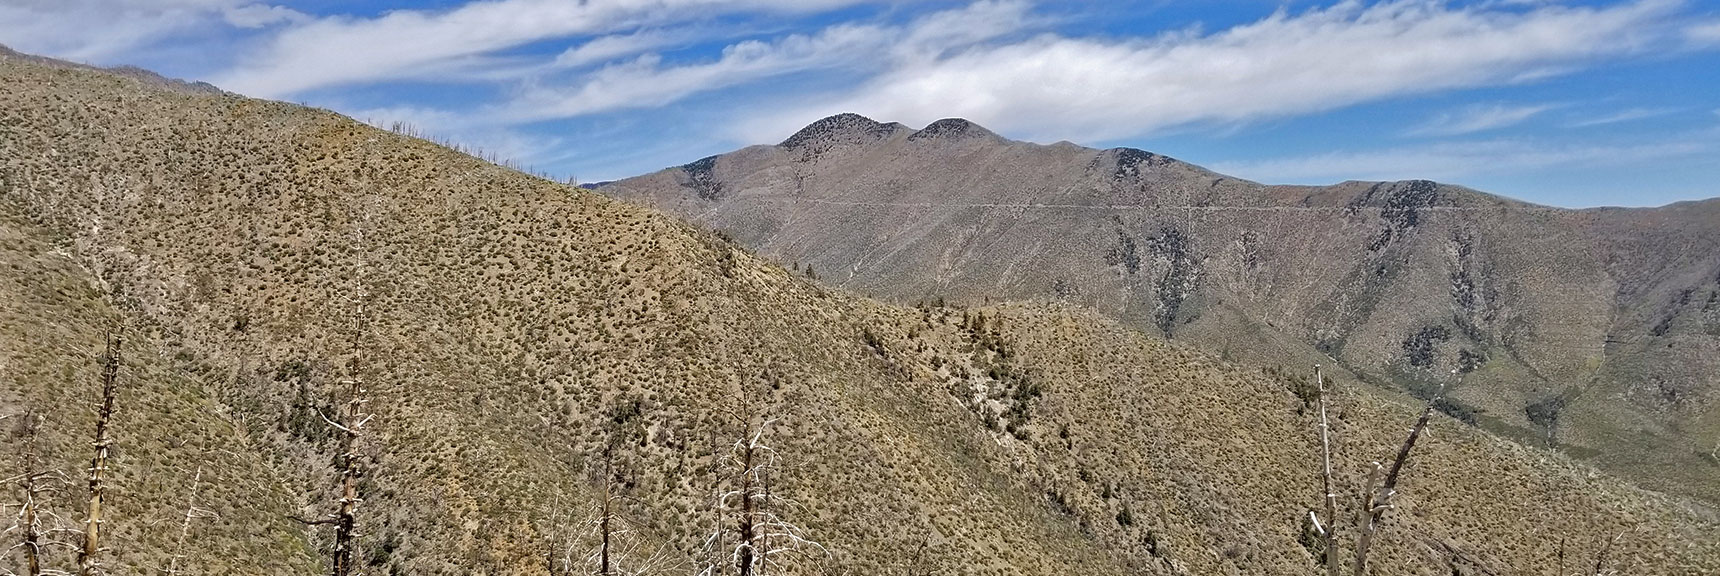 Harris Mountain and Trail Viewed from Across Lovell Canyon at 8000ft | Griffith Peak from Lovell Canyon Trailhead, Nevada, 030